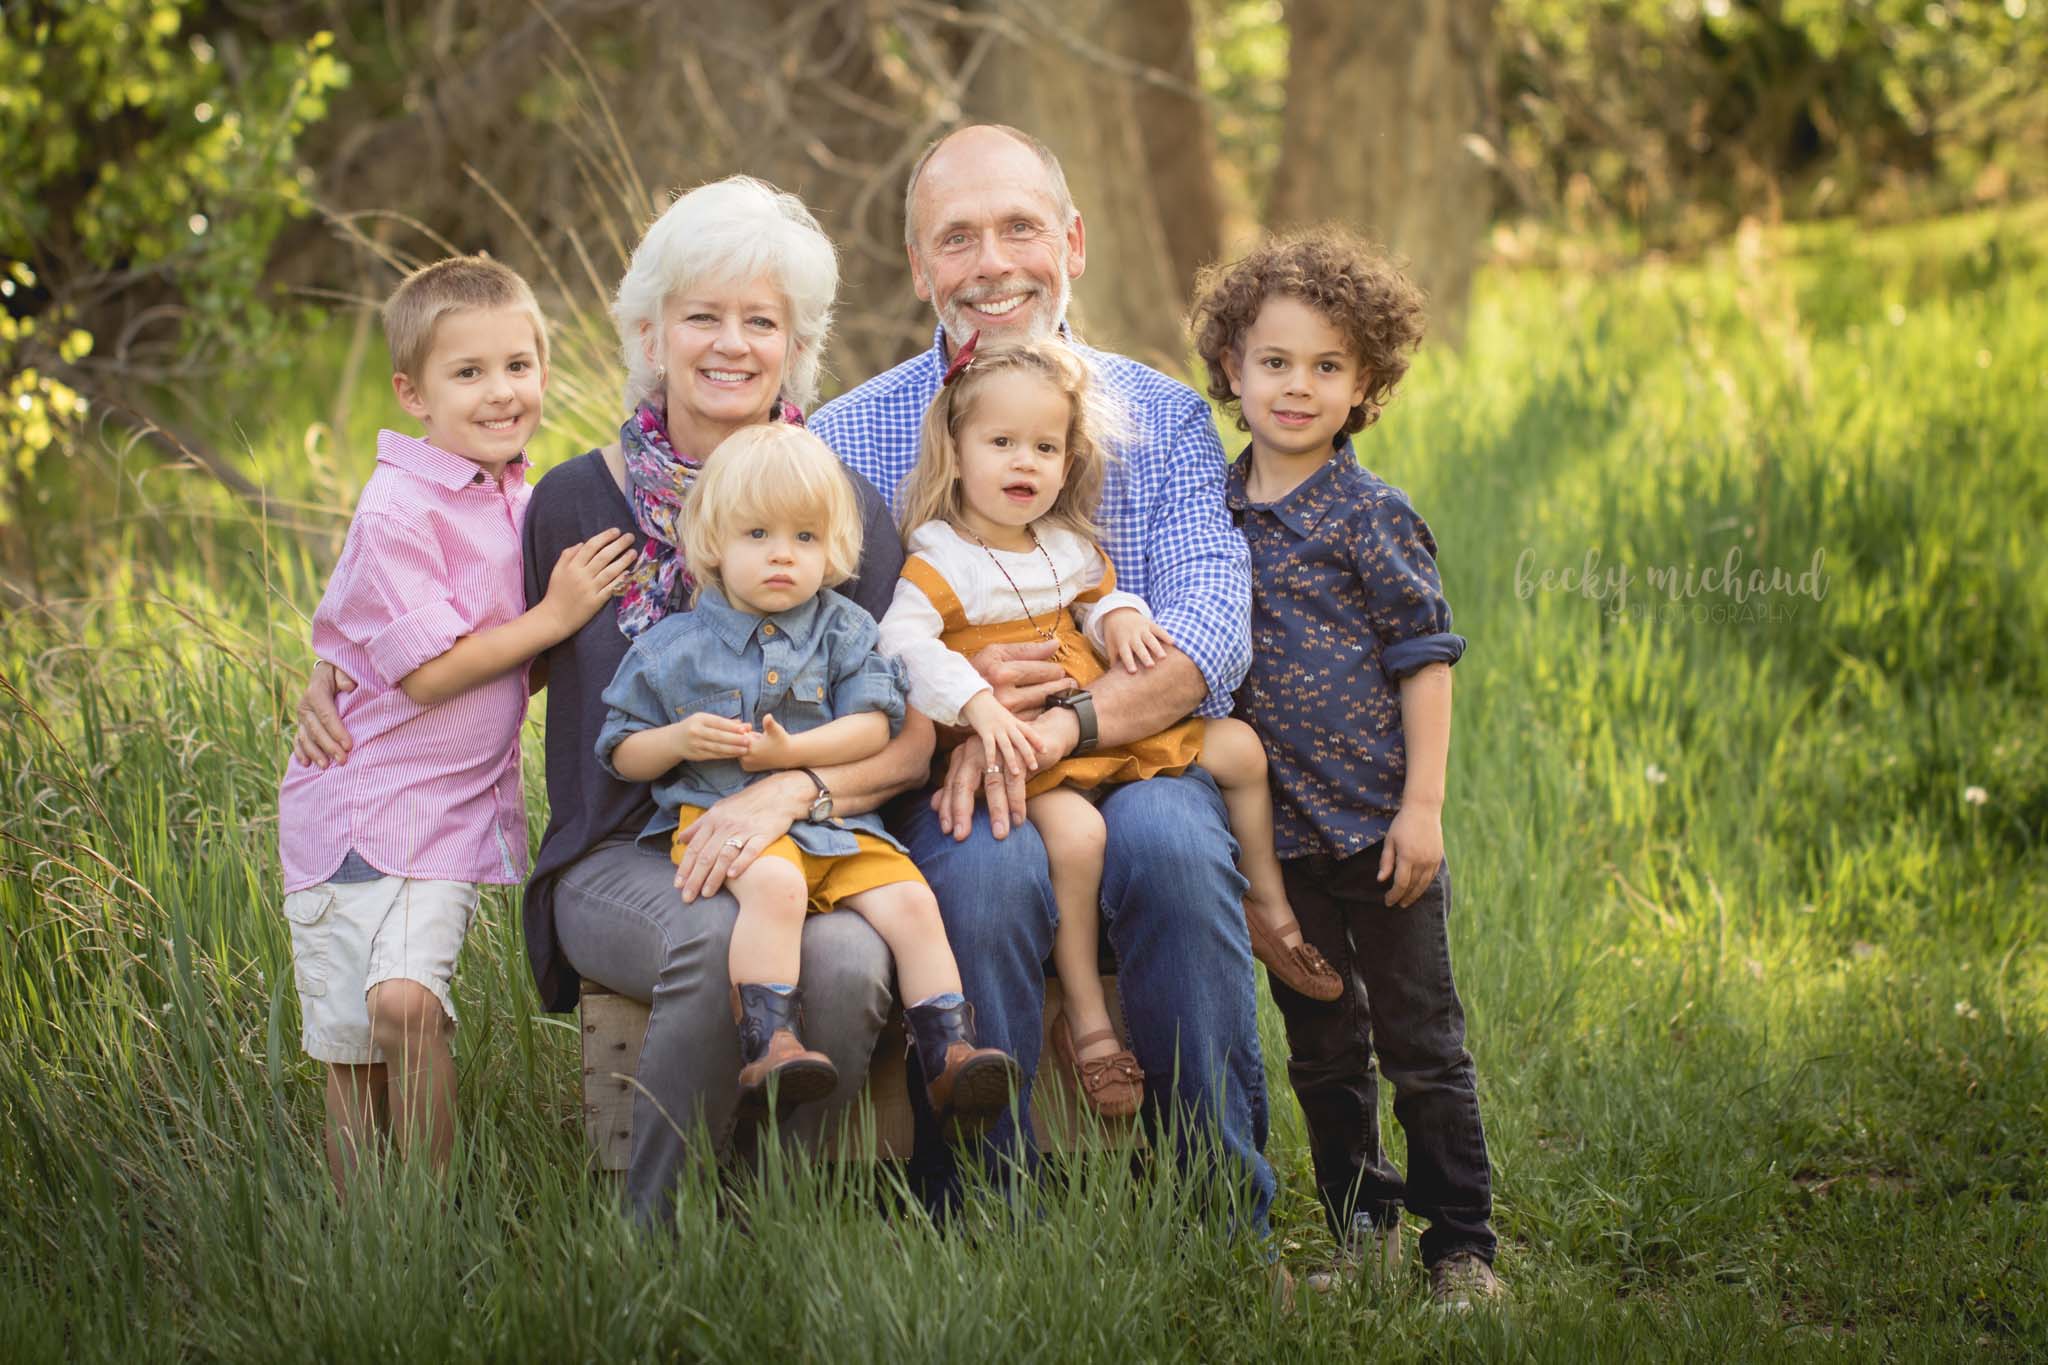 grandparents pose with their grandchildren for their family portrait taken by Becky Michaud, Fort Collins photographer